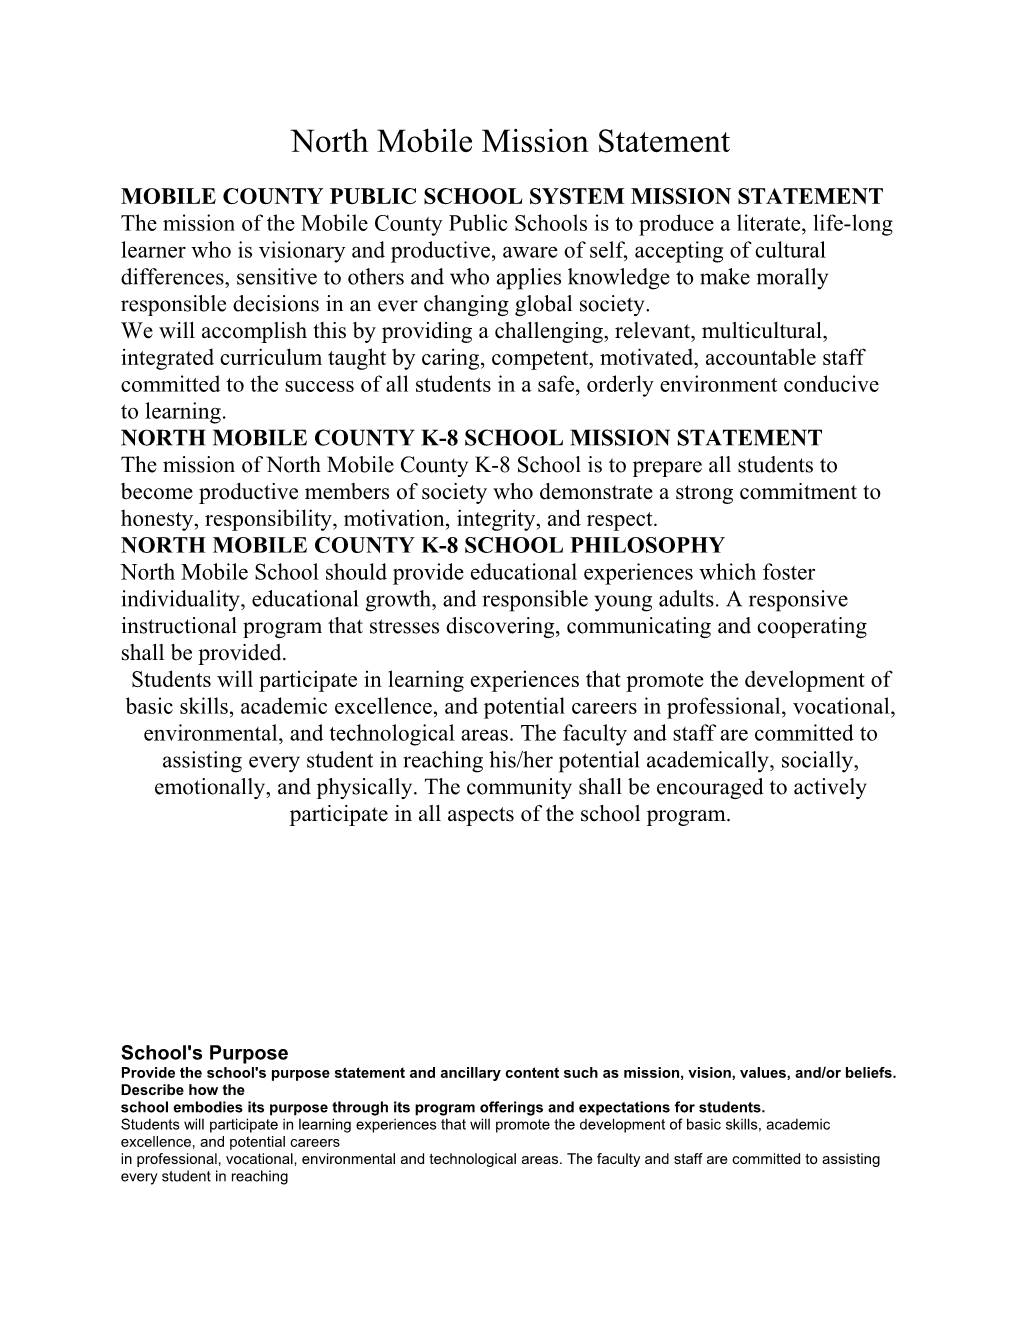 Mobile County Public School System Mission Statement